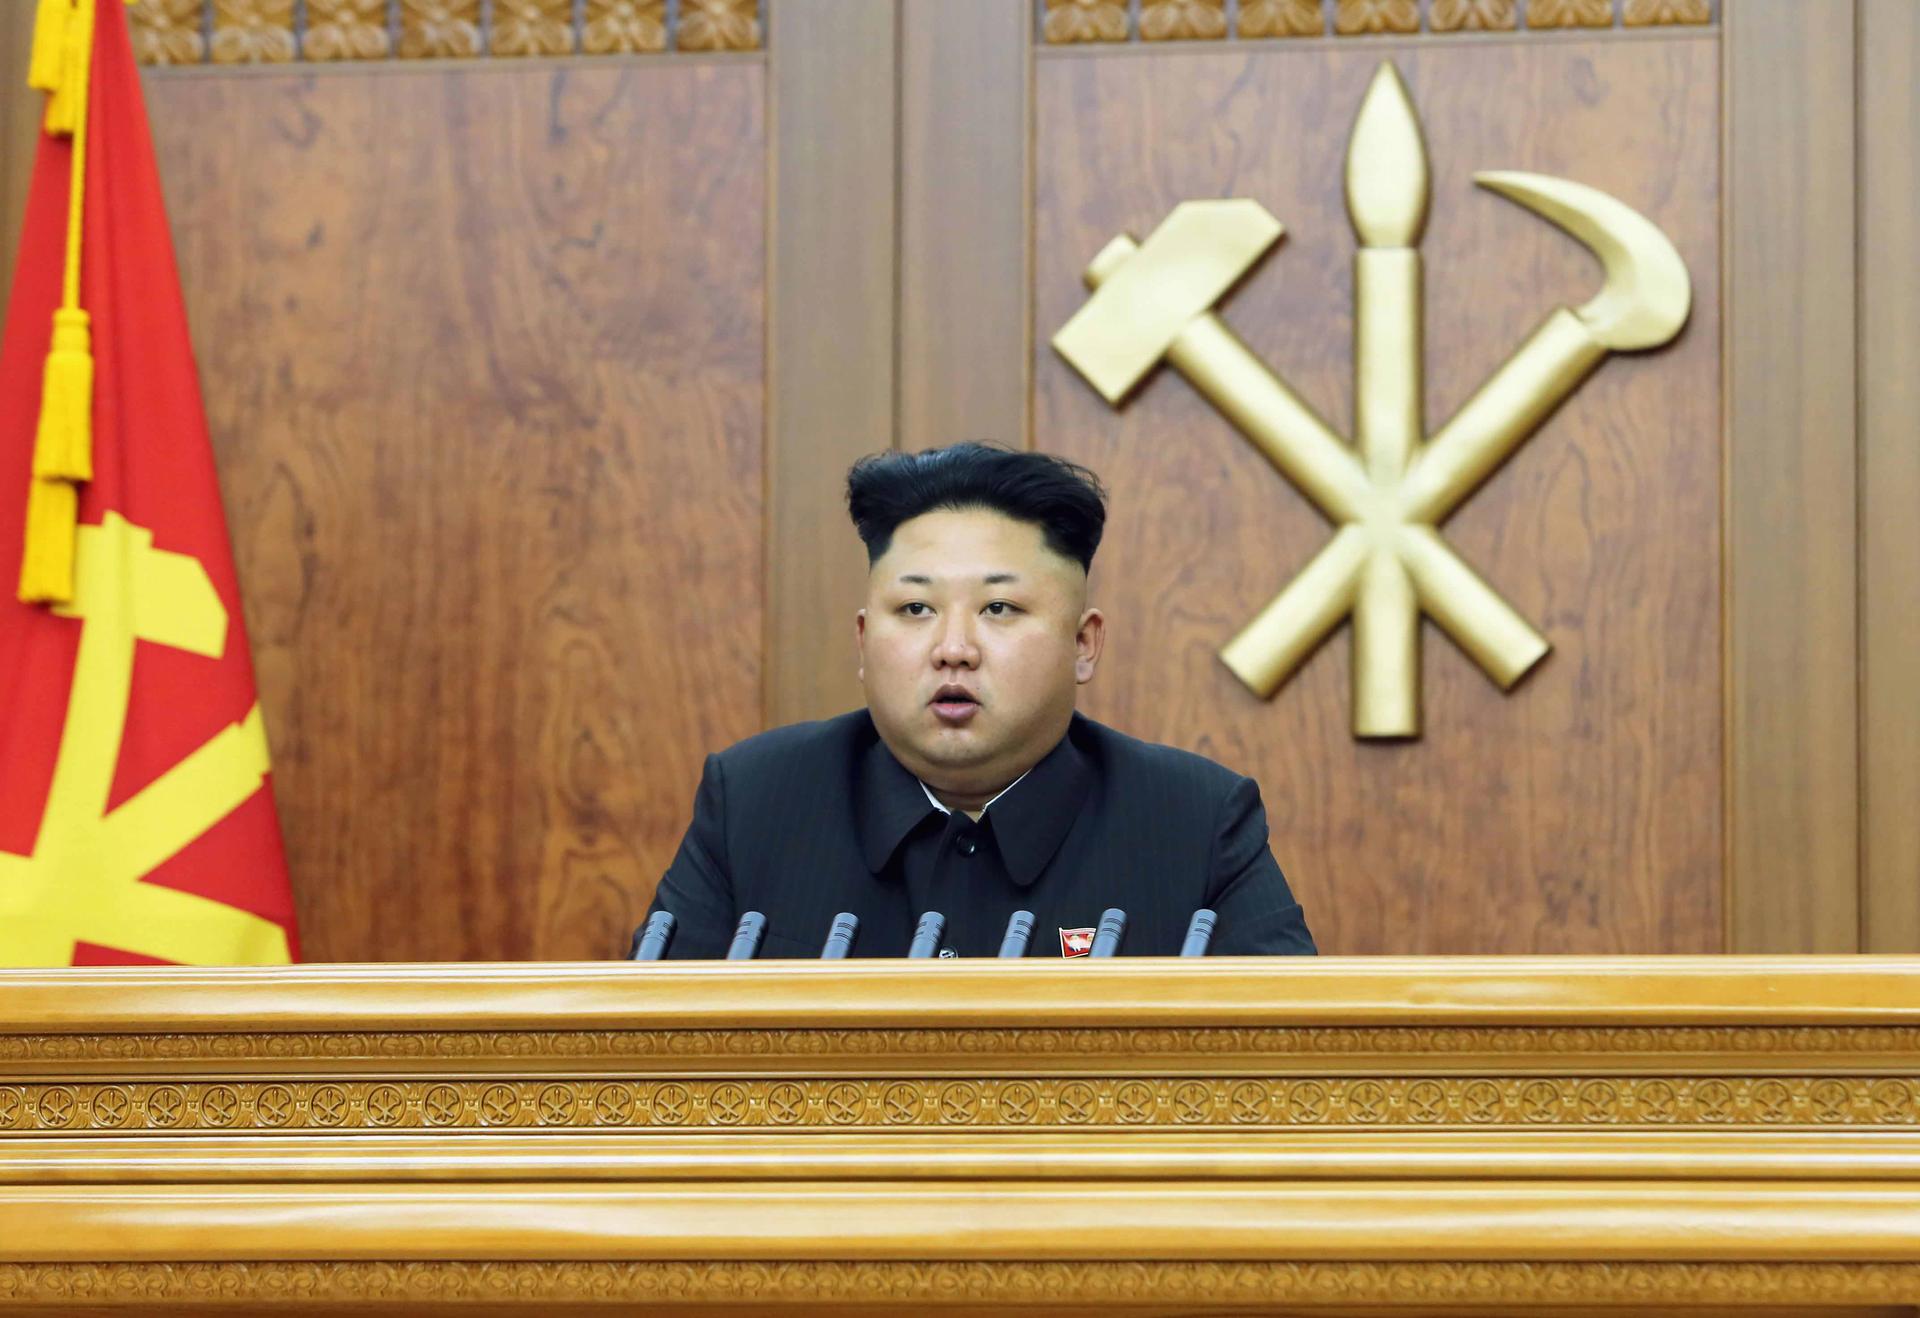 ​North Korean leader Kim Jong Un delivers a New Year's address in this January 1, 2015 photo released by North Korea's Korean Central News Agency (KCNA) in Pyongyang.